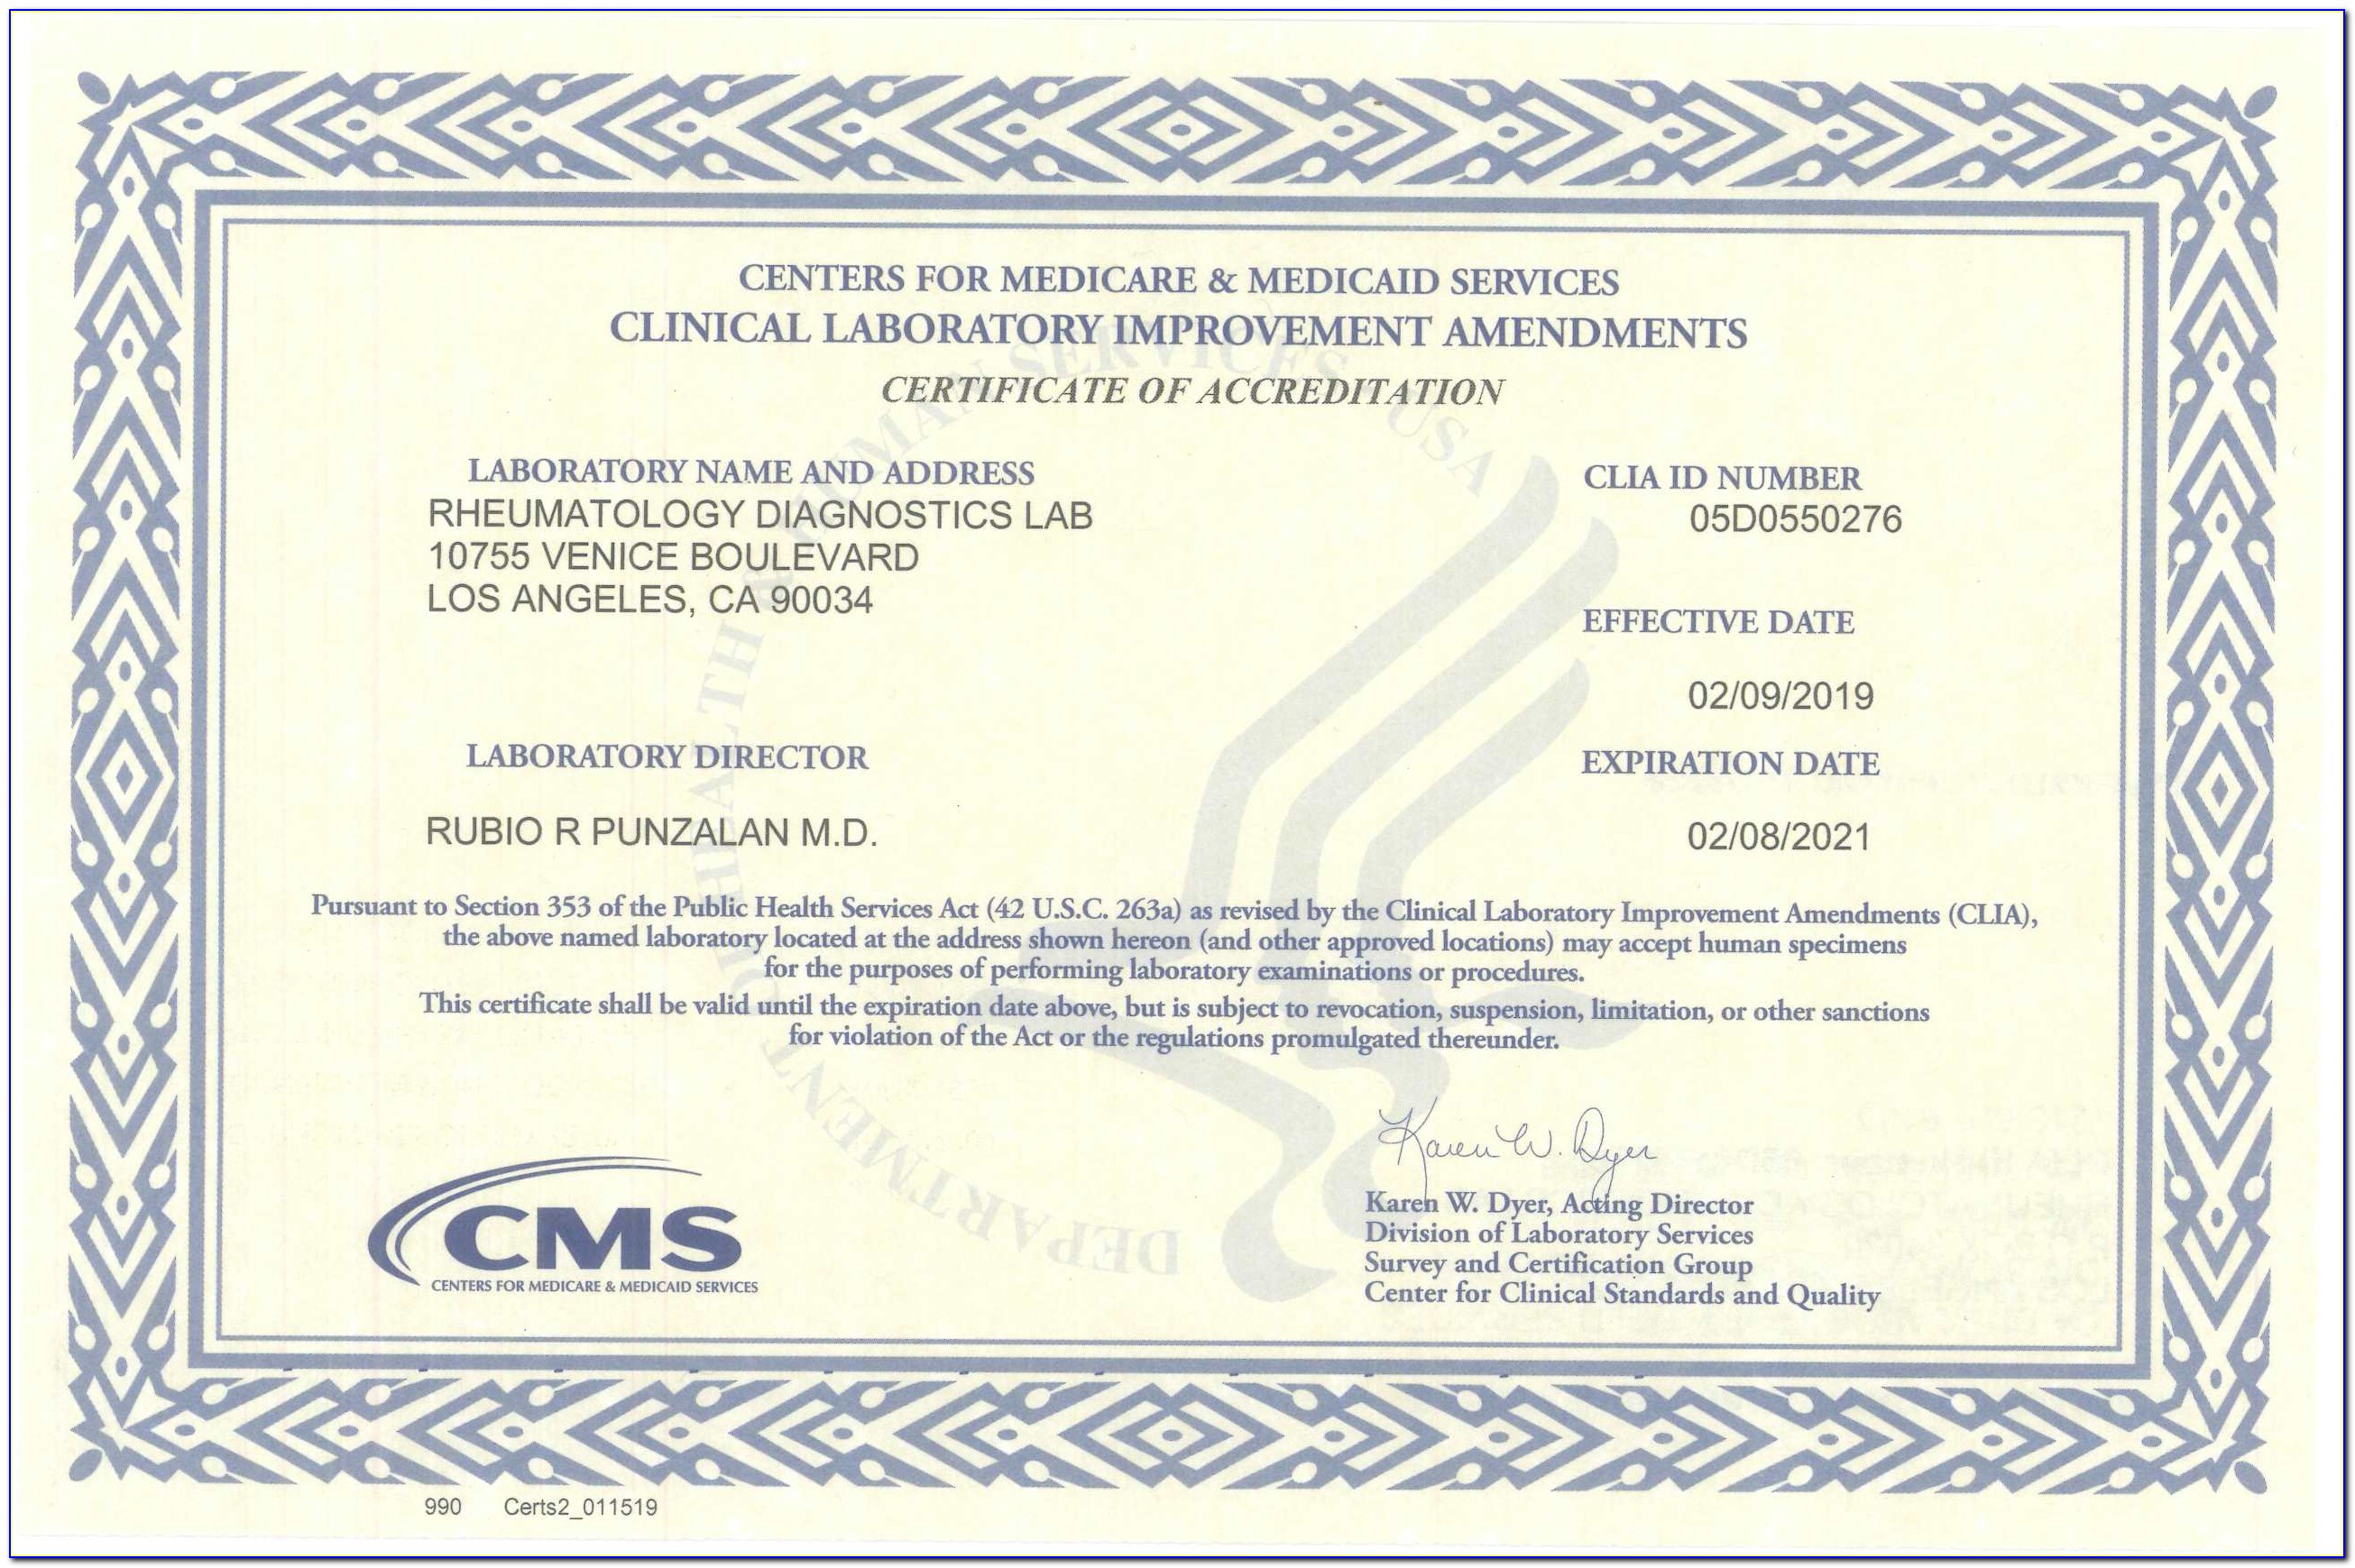 What Is Clia Certification Number